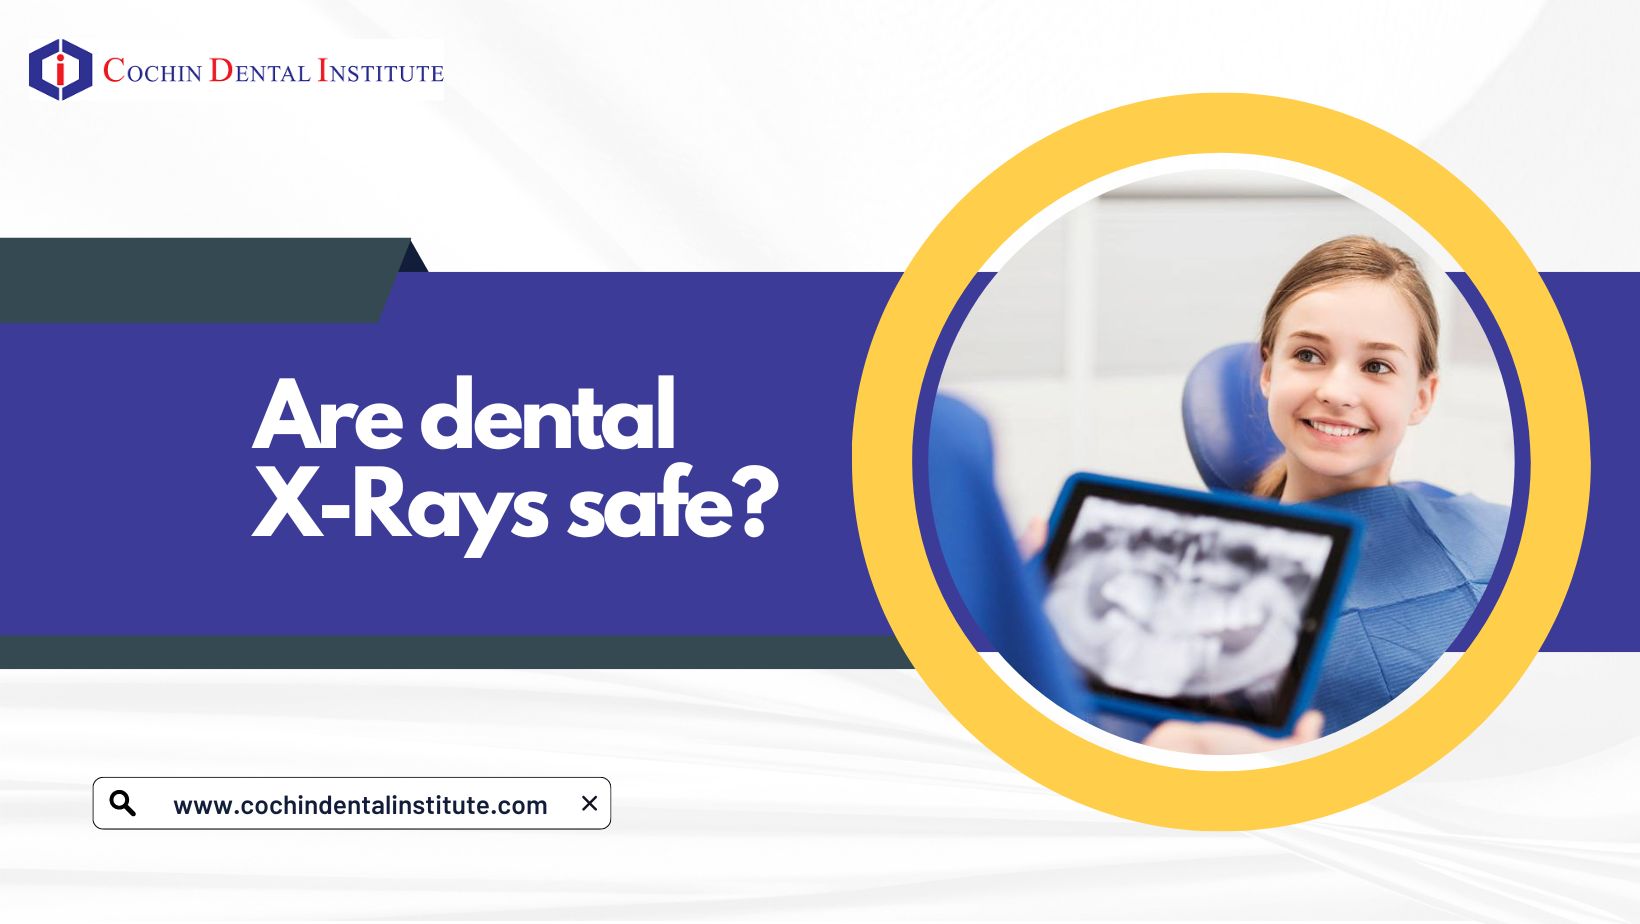 Are dental X-rays safe?